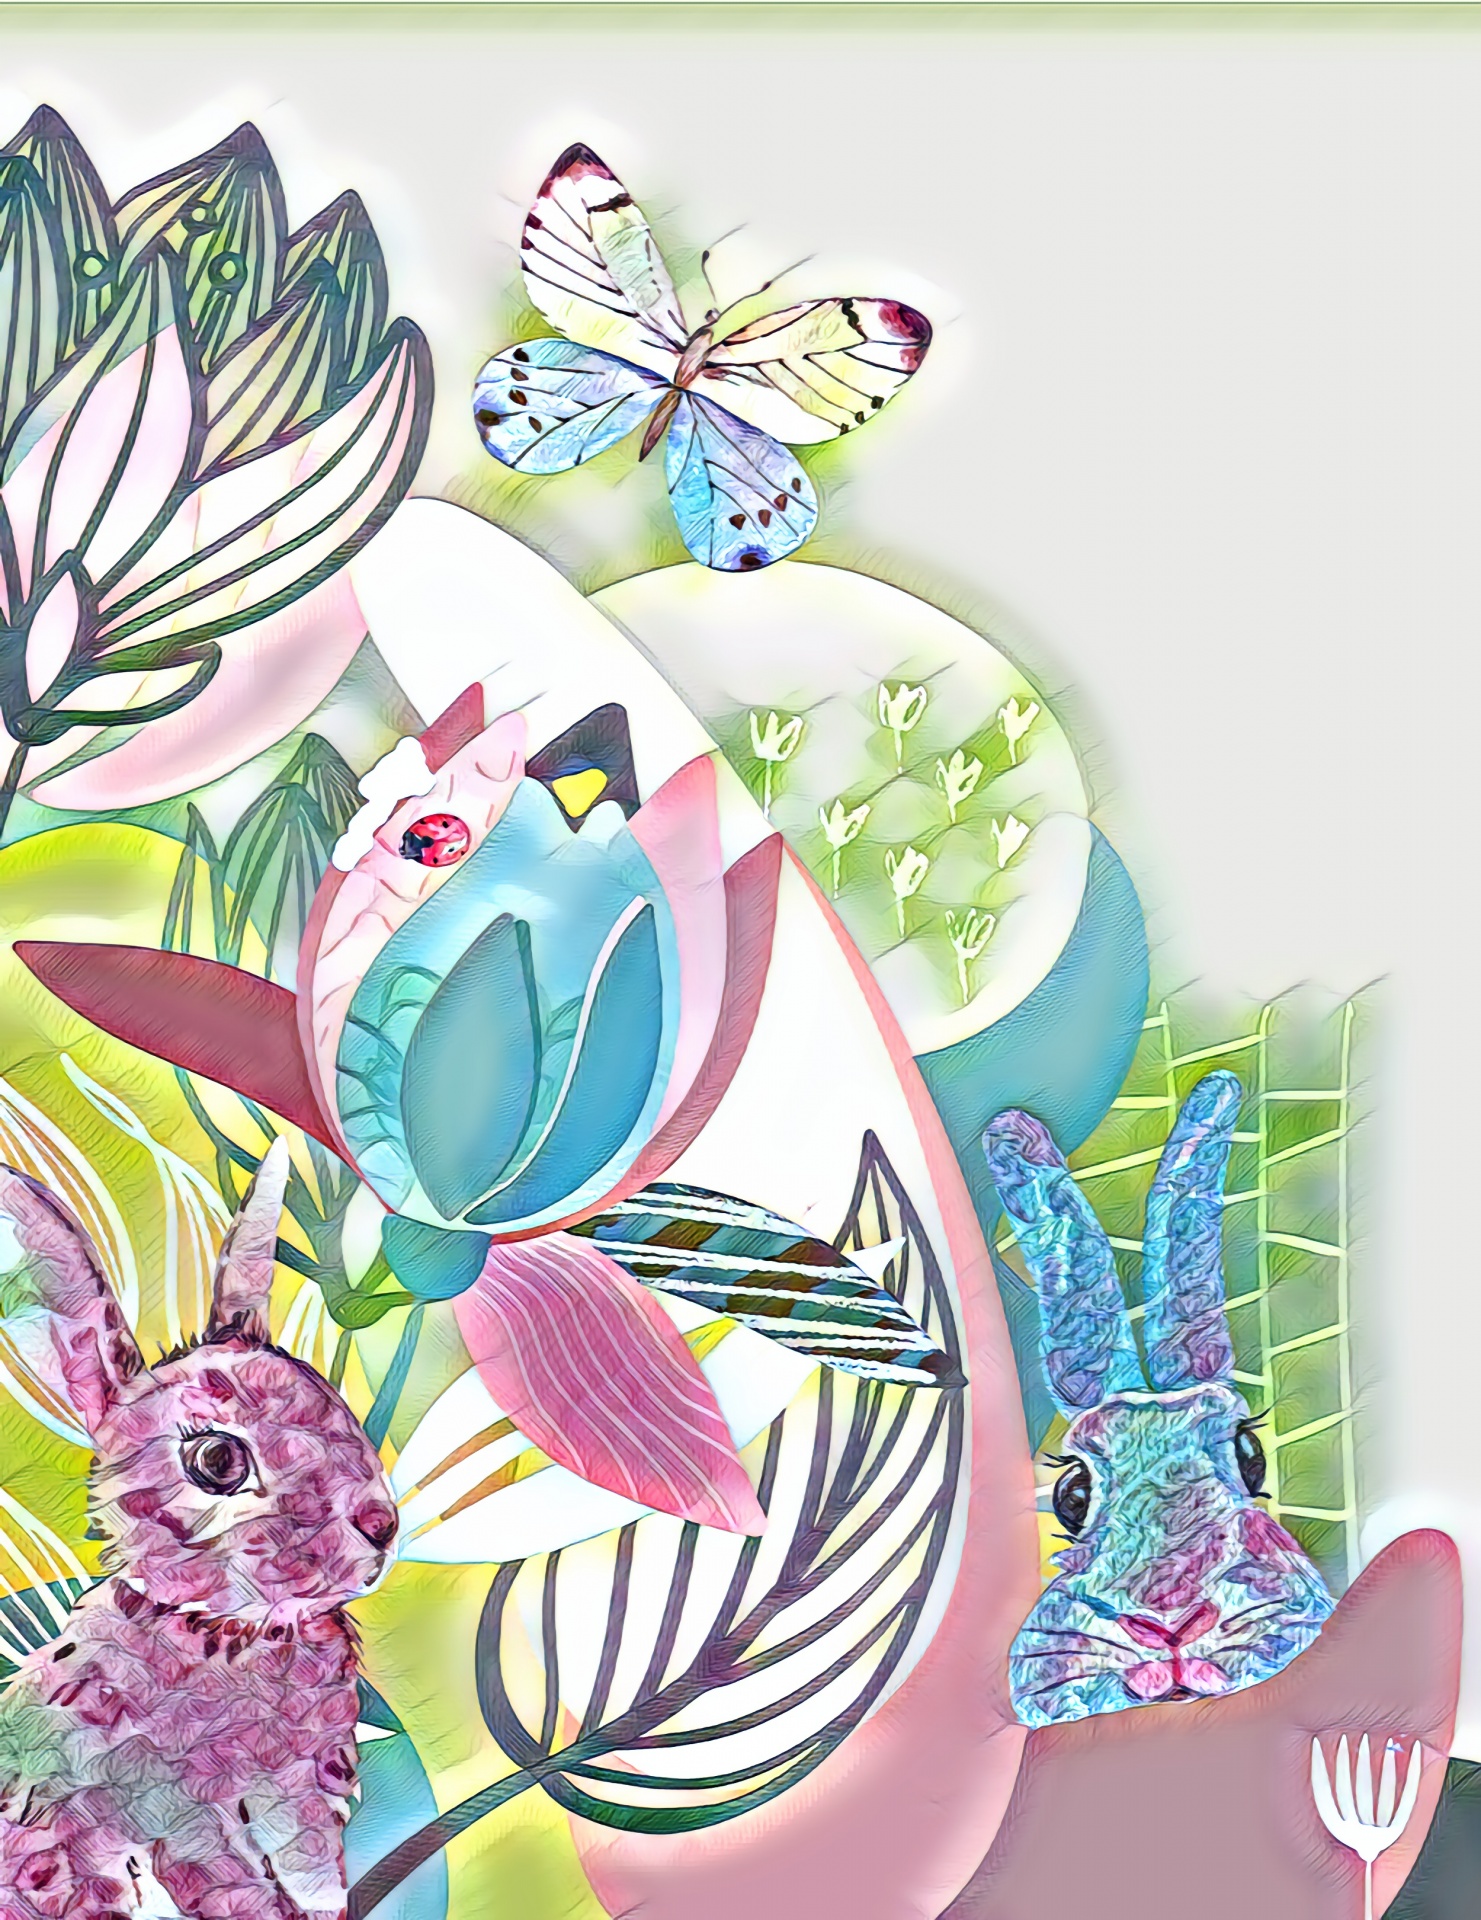 contemporary art illustration of bunnies a butterfly, and flowers